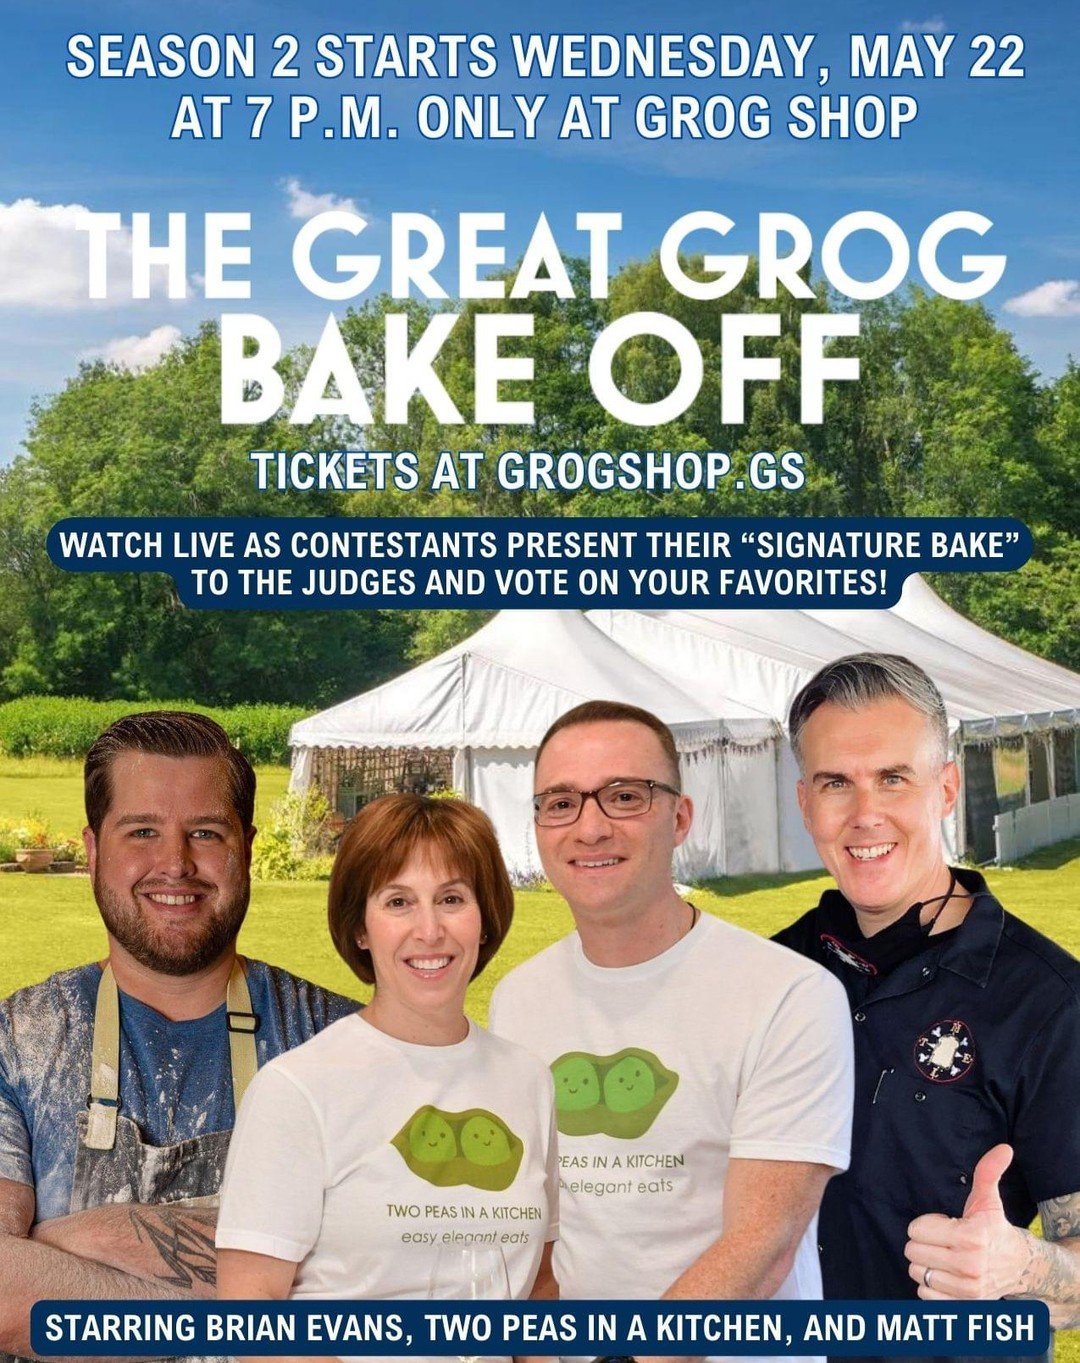 Our very own Brian Evans is going to be a judge at The Great Grog Bake Off next Wednesday at 7pm! 

Grab your tickets now: https://www.ticketweb.com/event/the-great-grog-bake-off-grog-shop-tickets/13460934?pl=grogshop